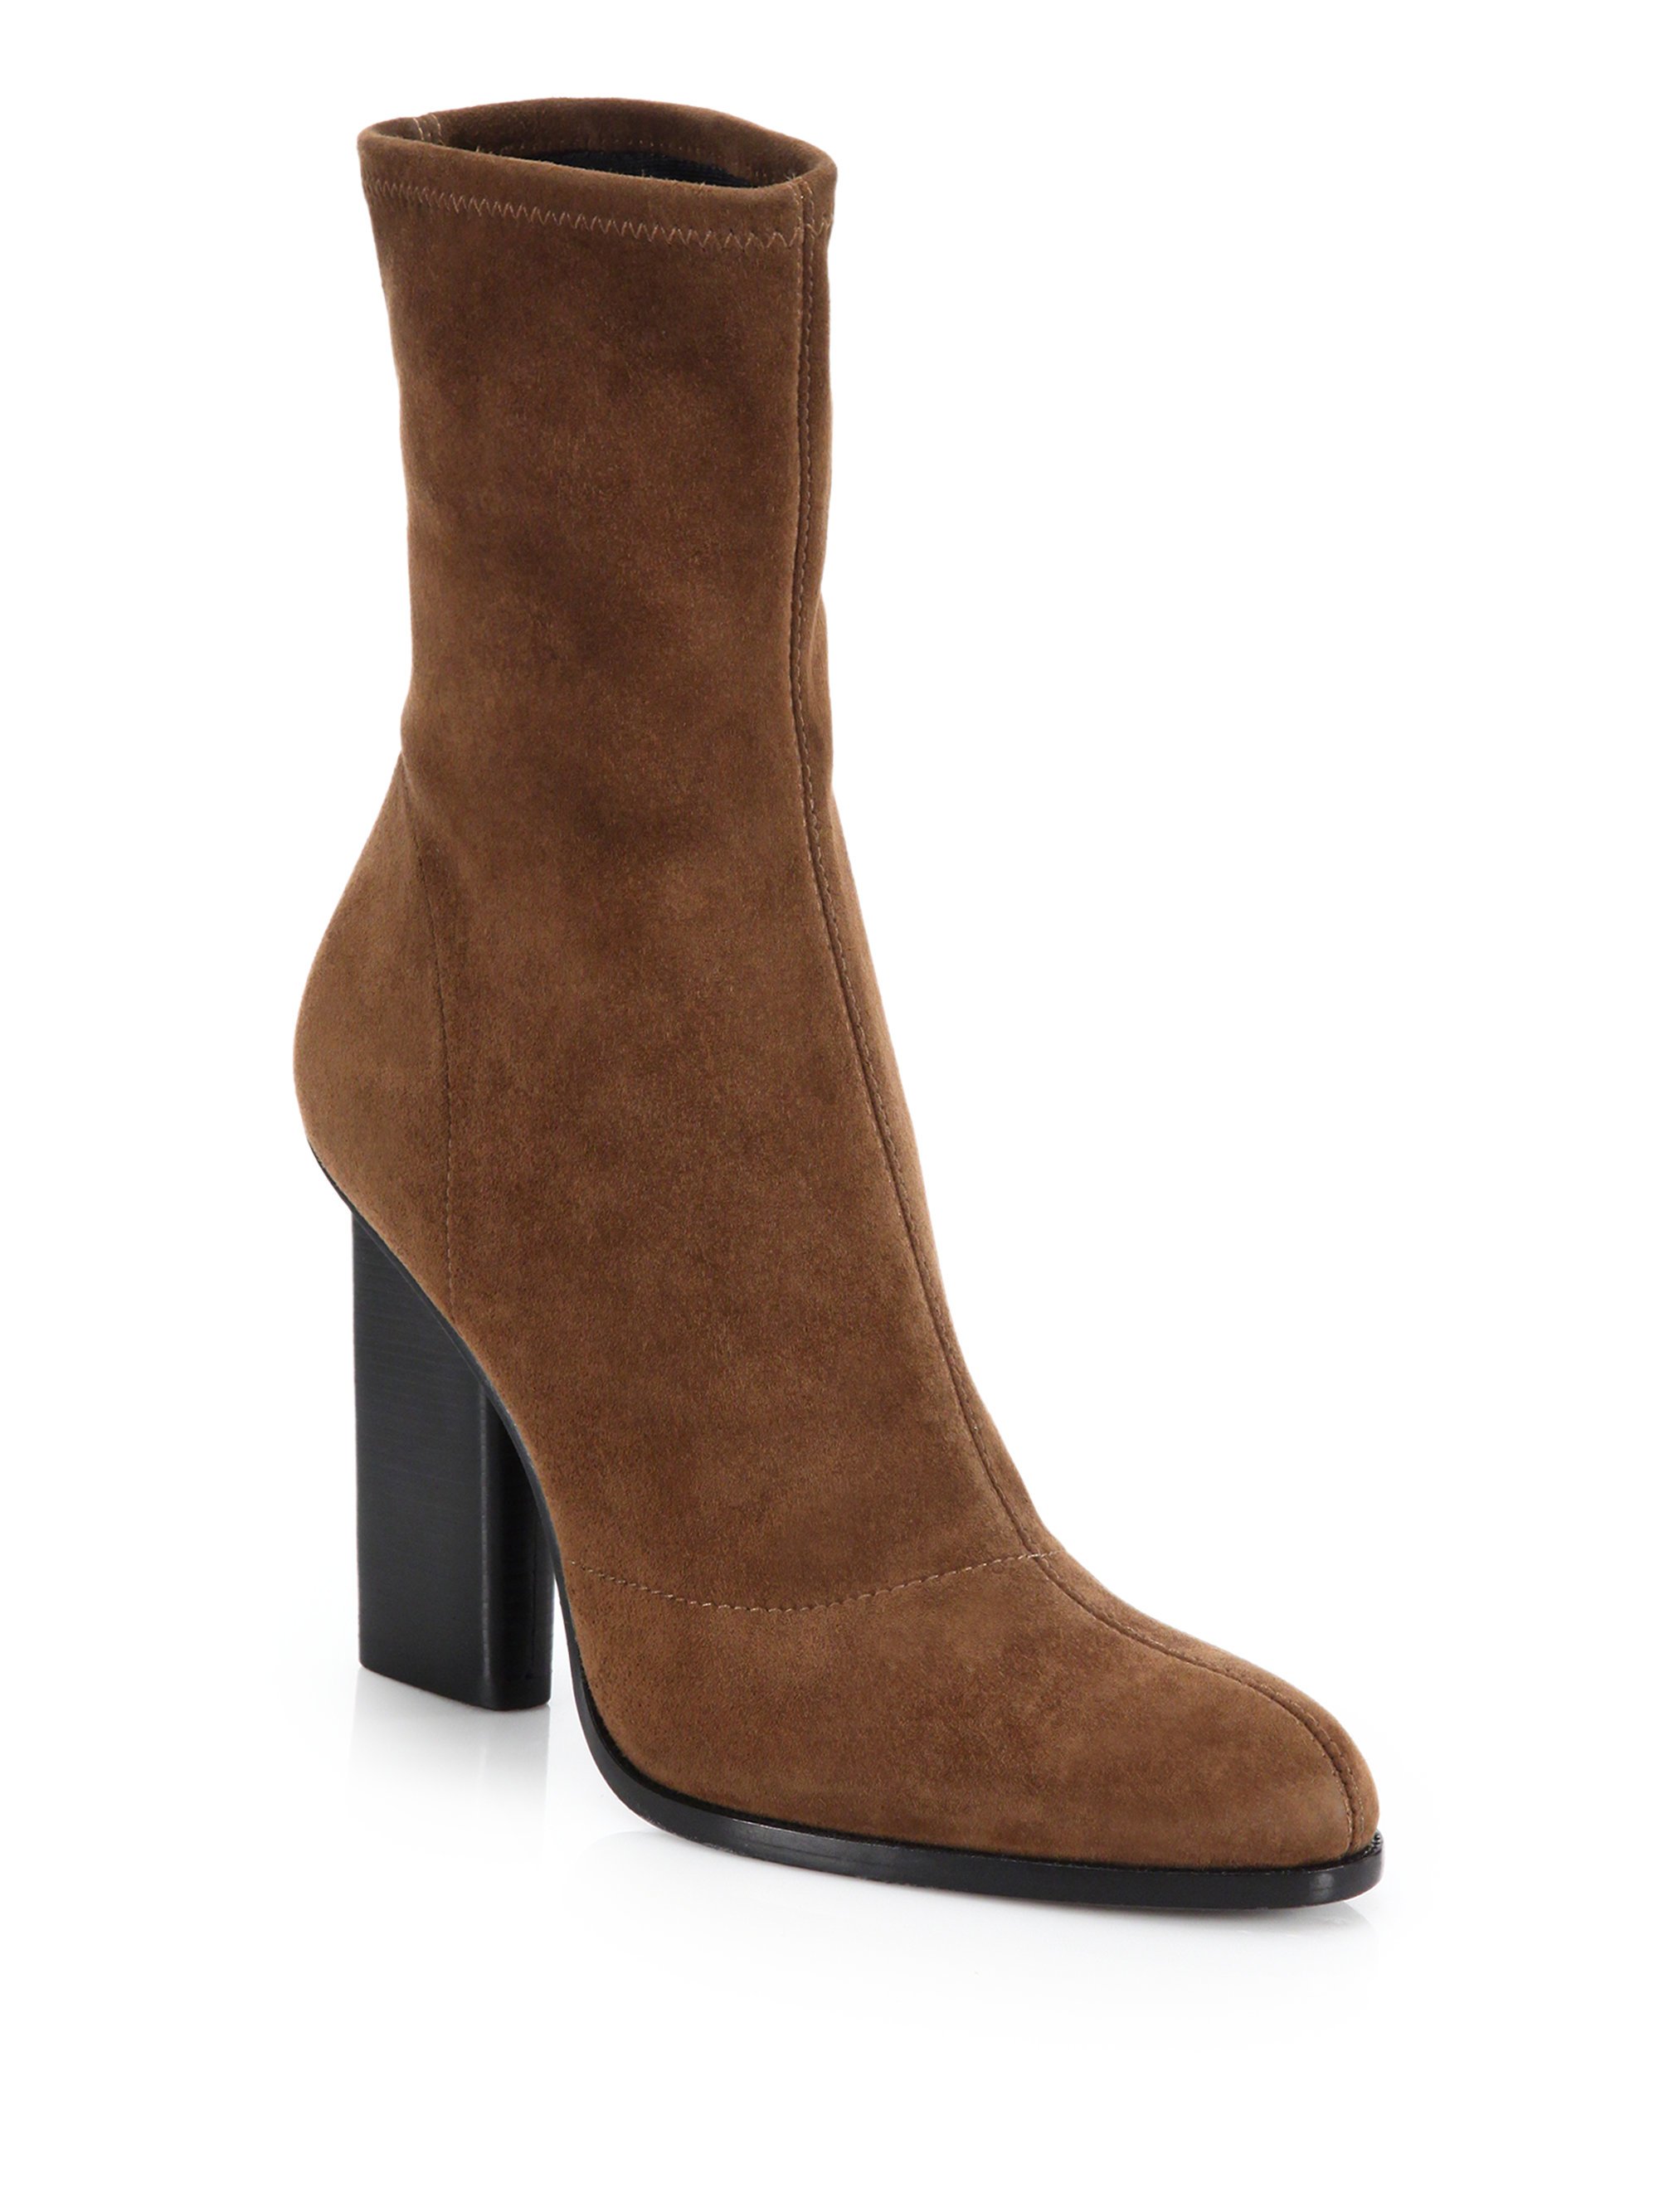 Alexander Wang Gia Stretch-Suede Ankle Boots in Brown - Lyst